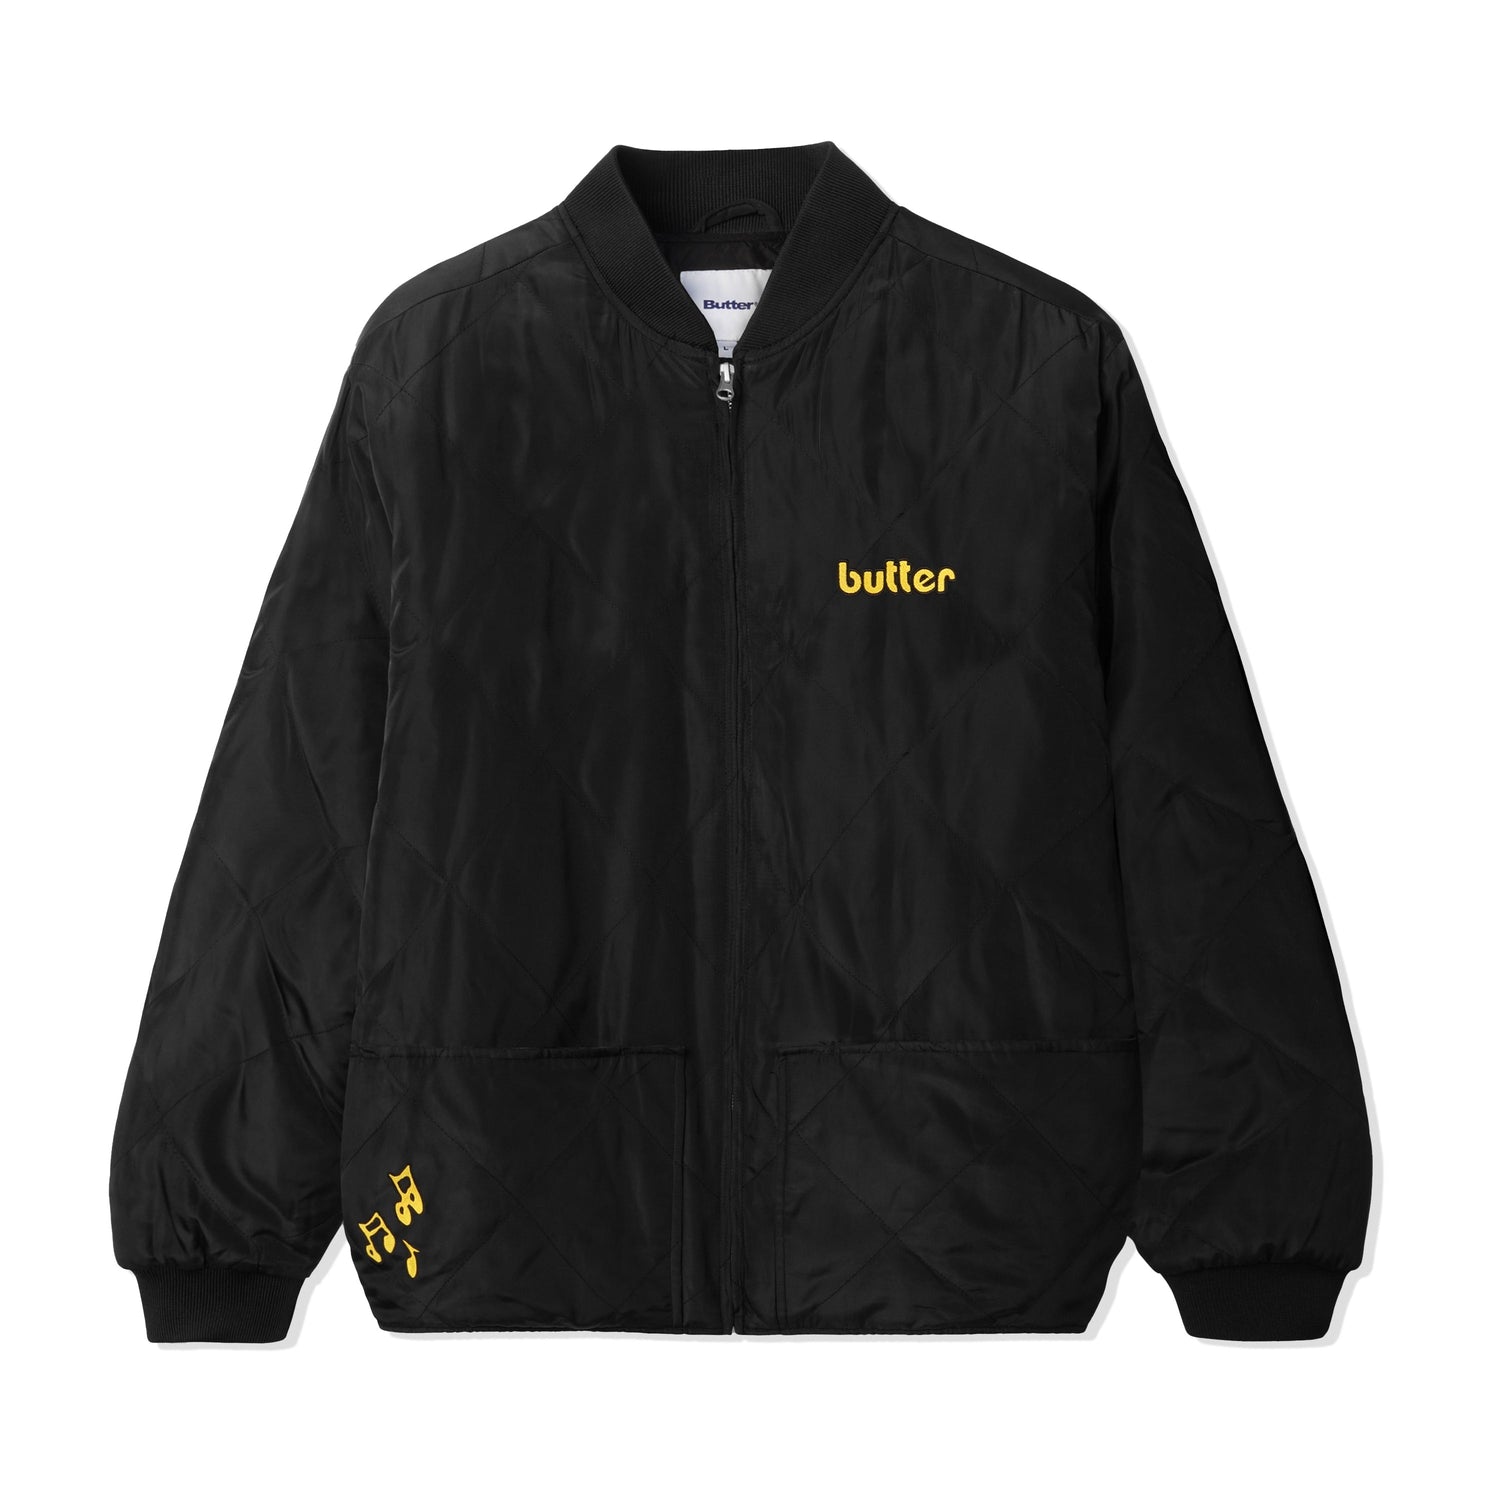 Noise Pollution Quilted Work Jacket, Black